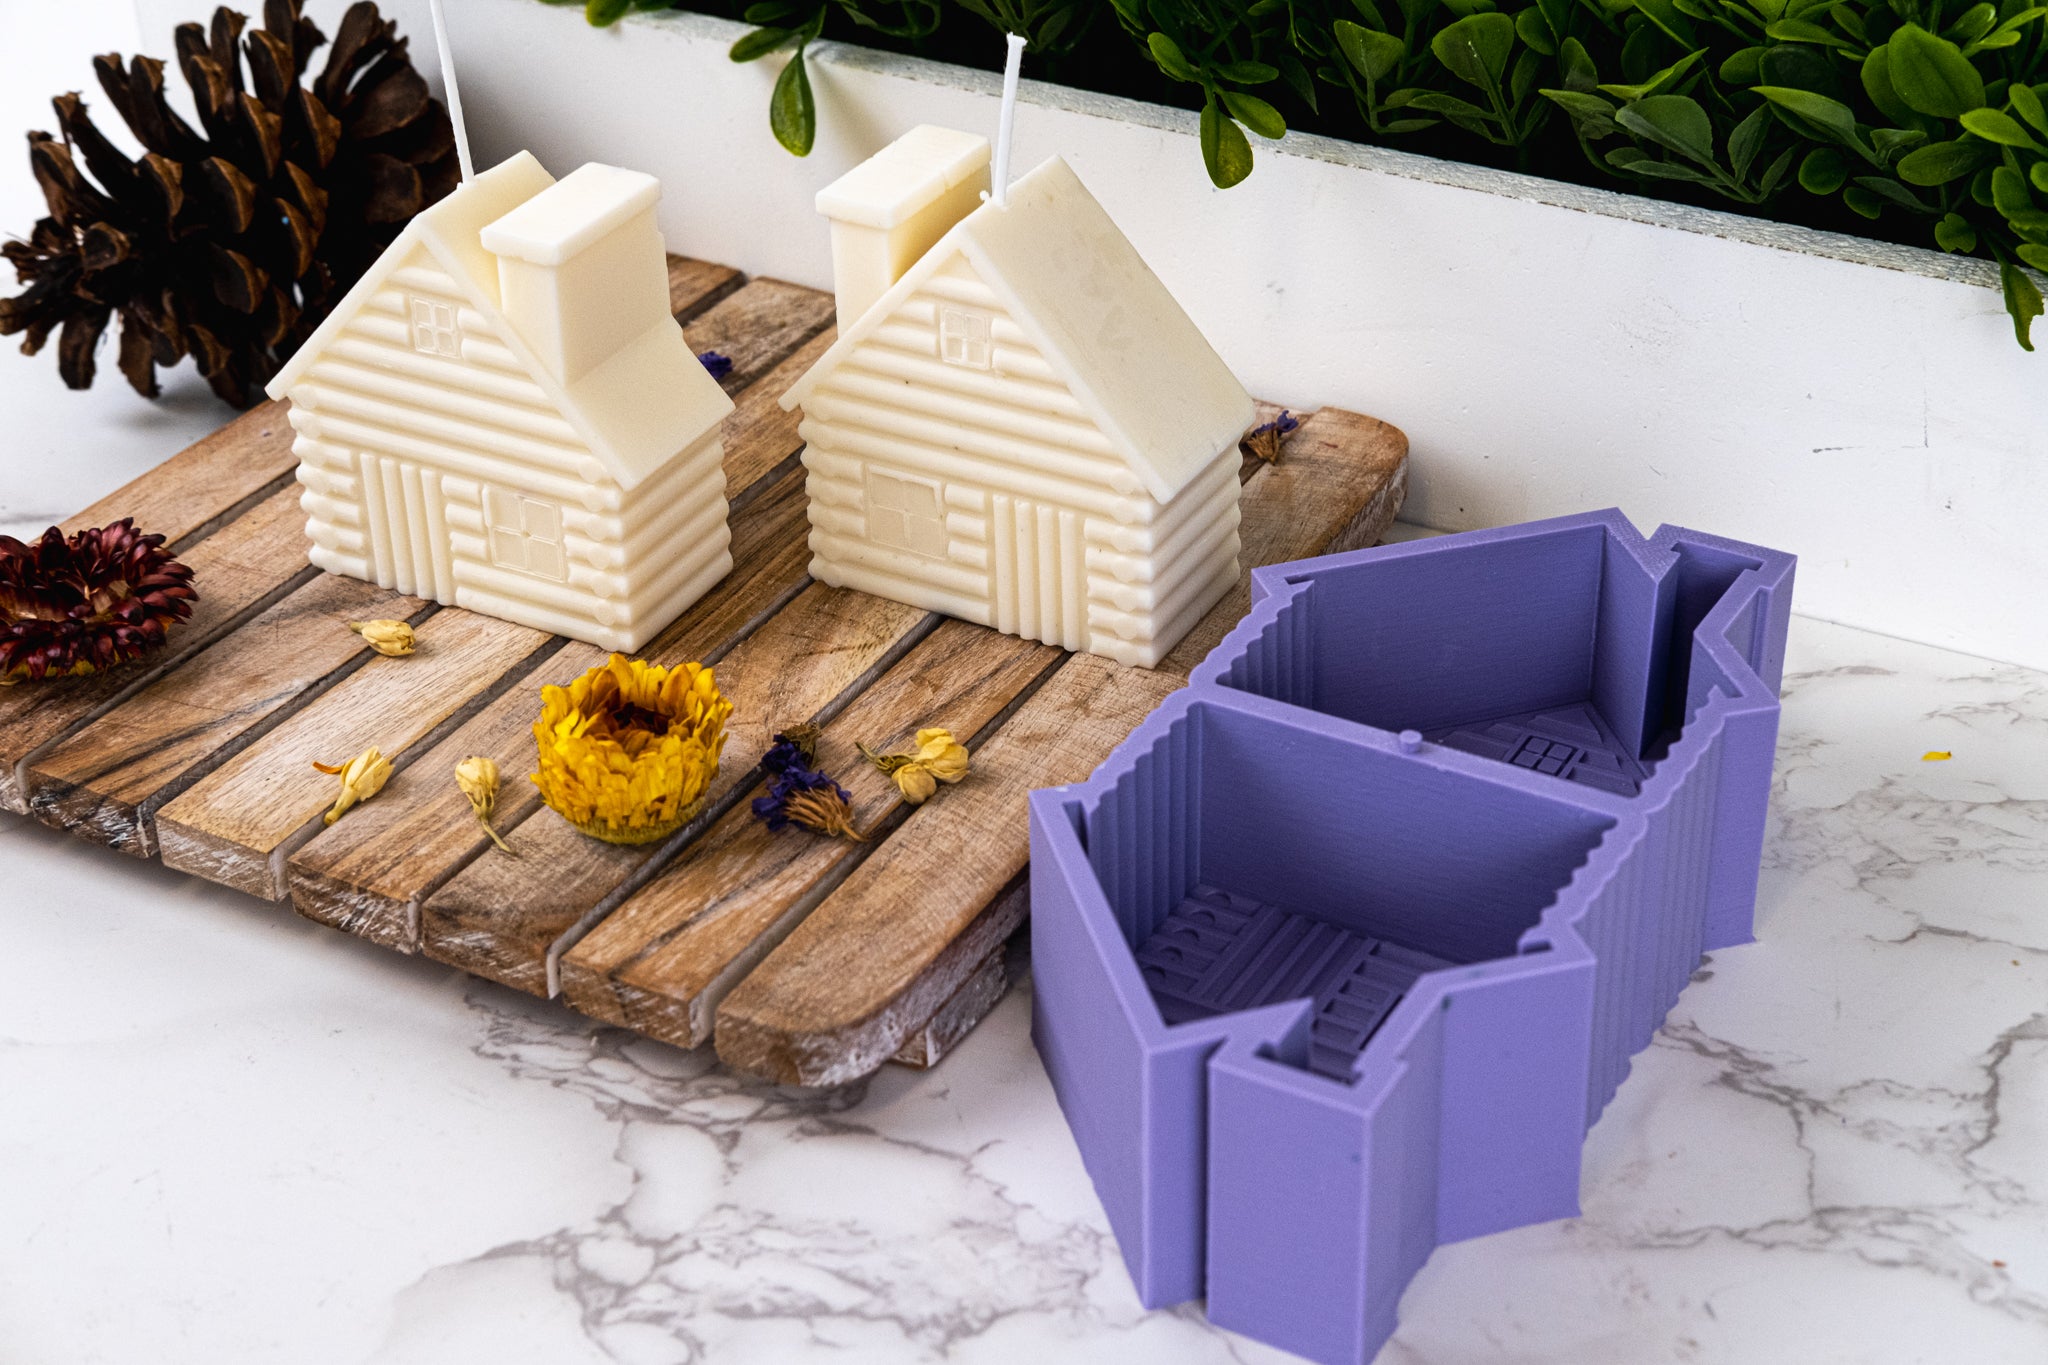 Log Cabin Silicone Mold for Candles, Soap, Crafts